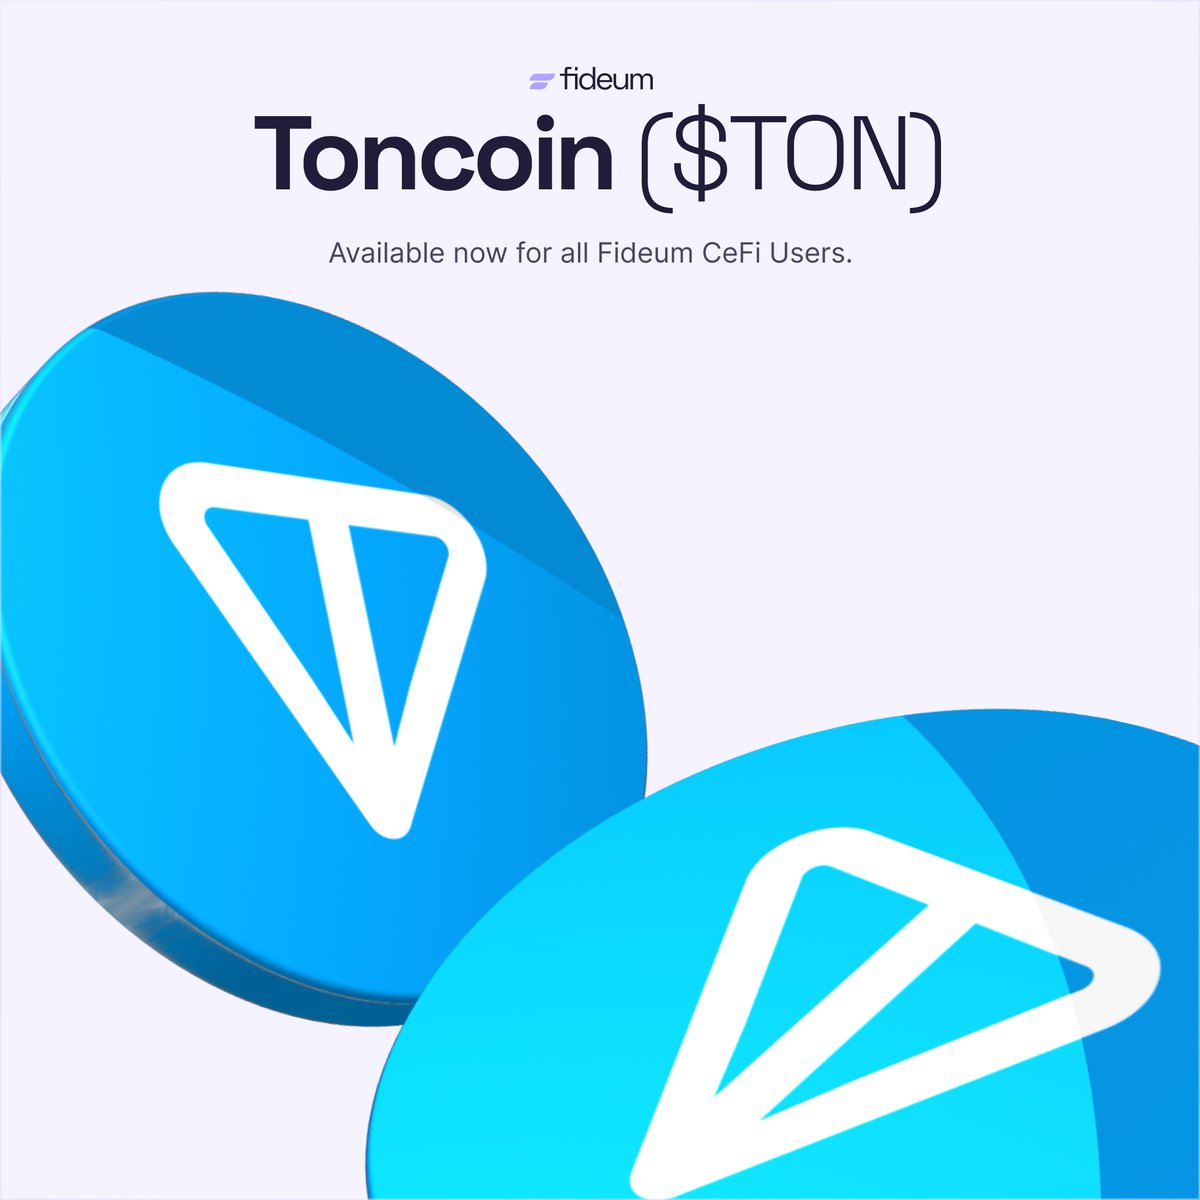 $TON is now available to all Fideum CeFi Users. Users can log in to send, receive, exchange or store these assets at app.blockbank.ai, as well as through the #Fideum iOS and Android apps. Please refresh your app to start trading.